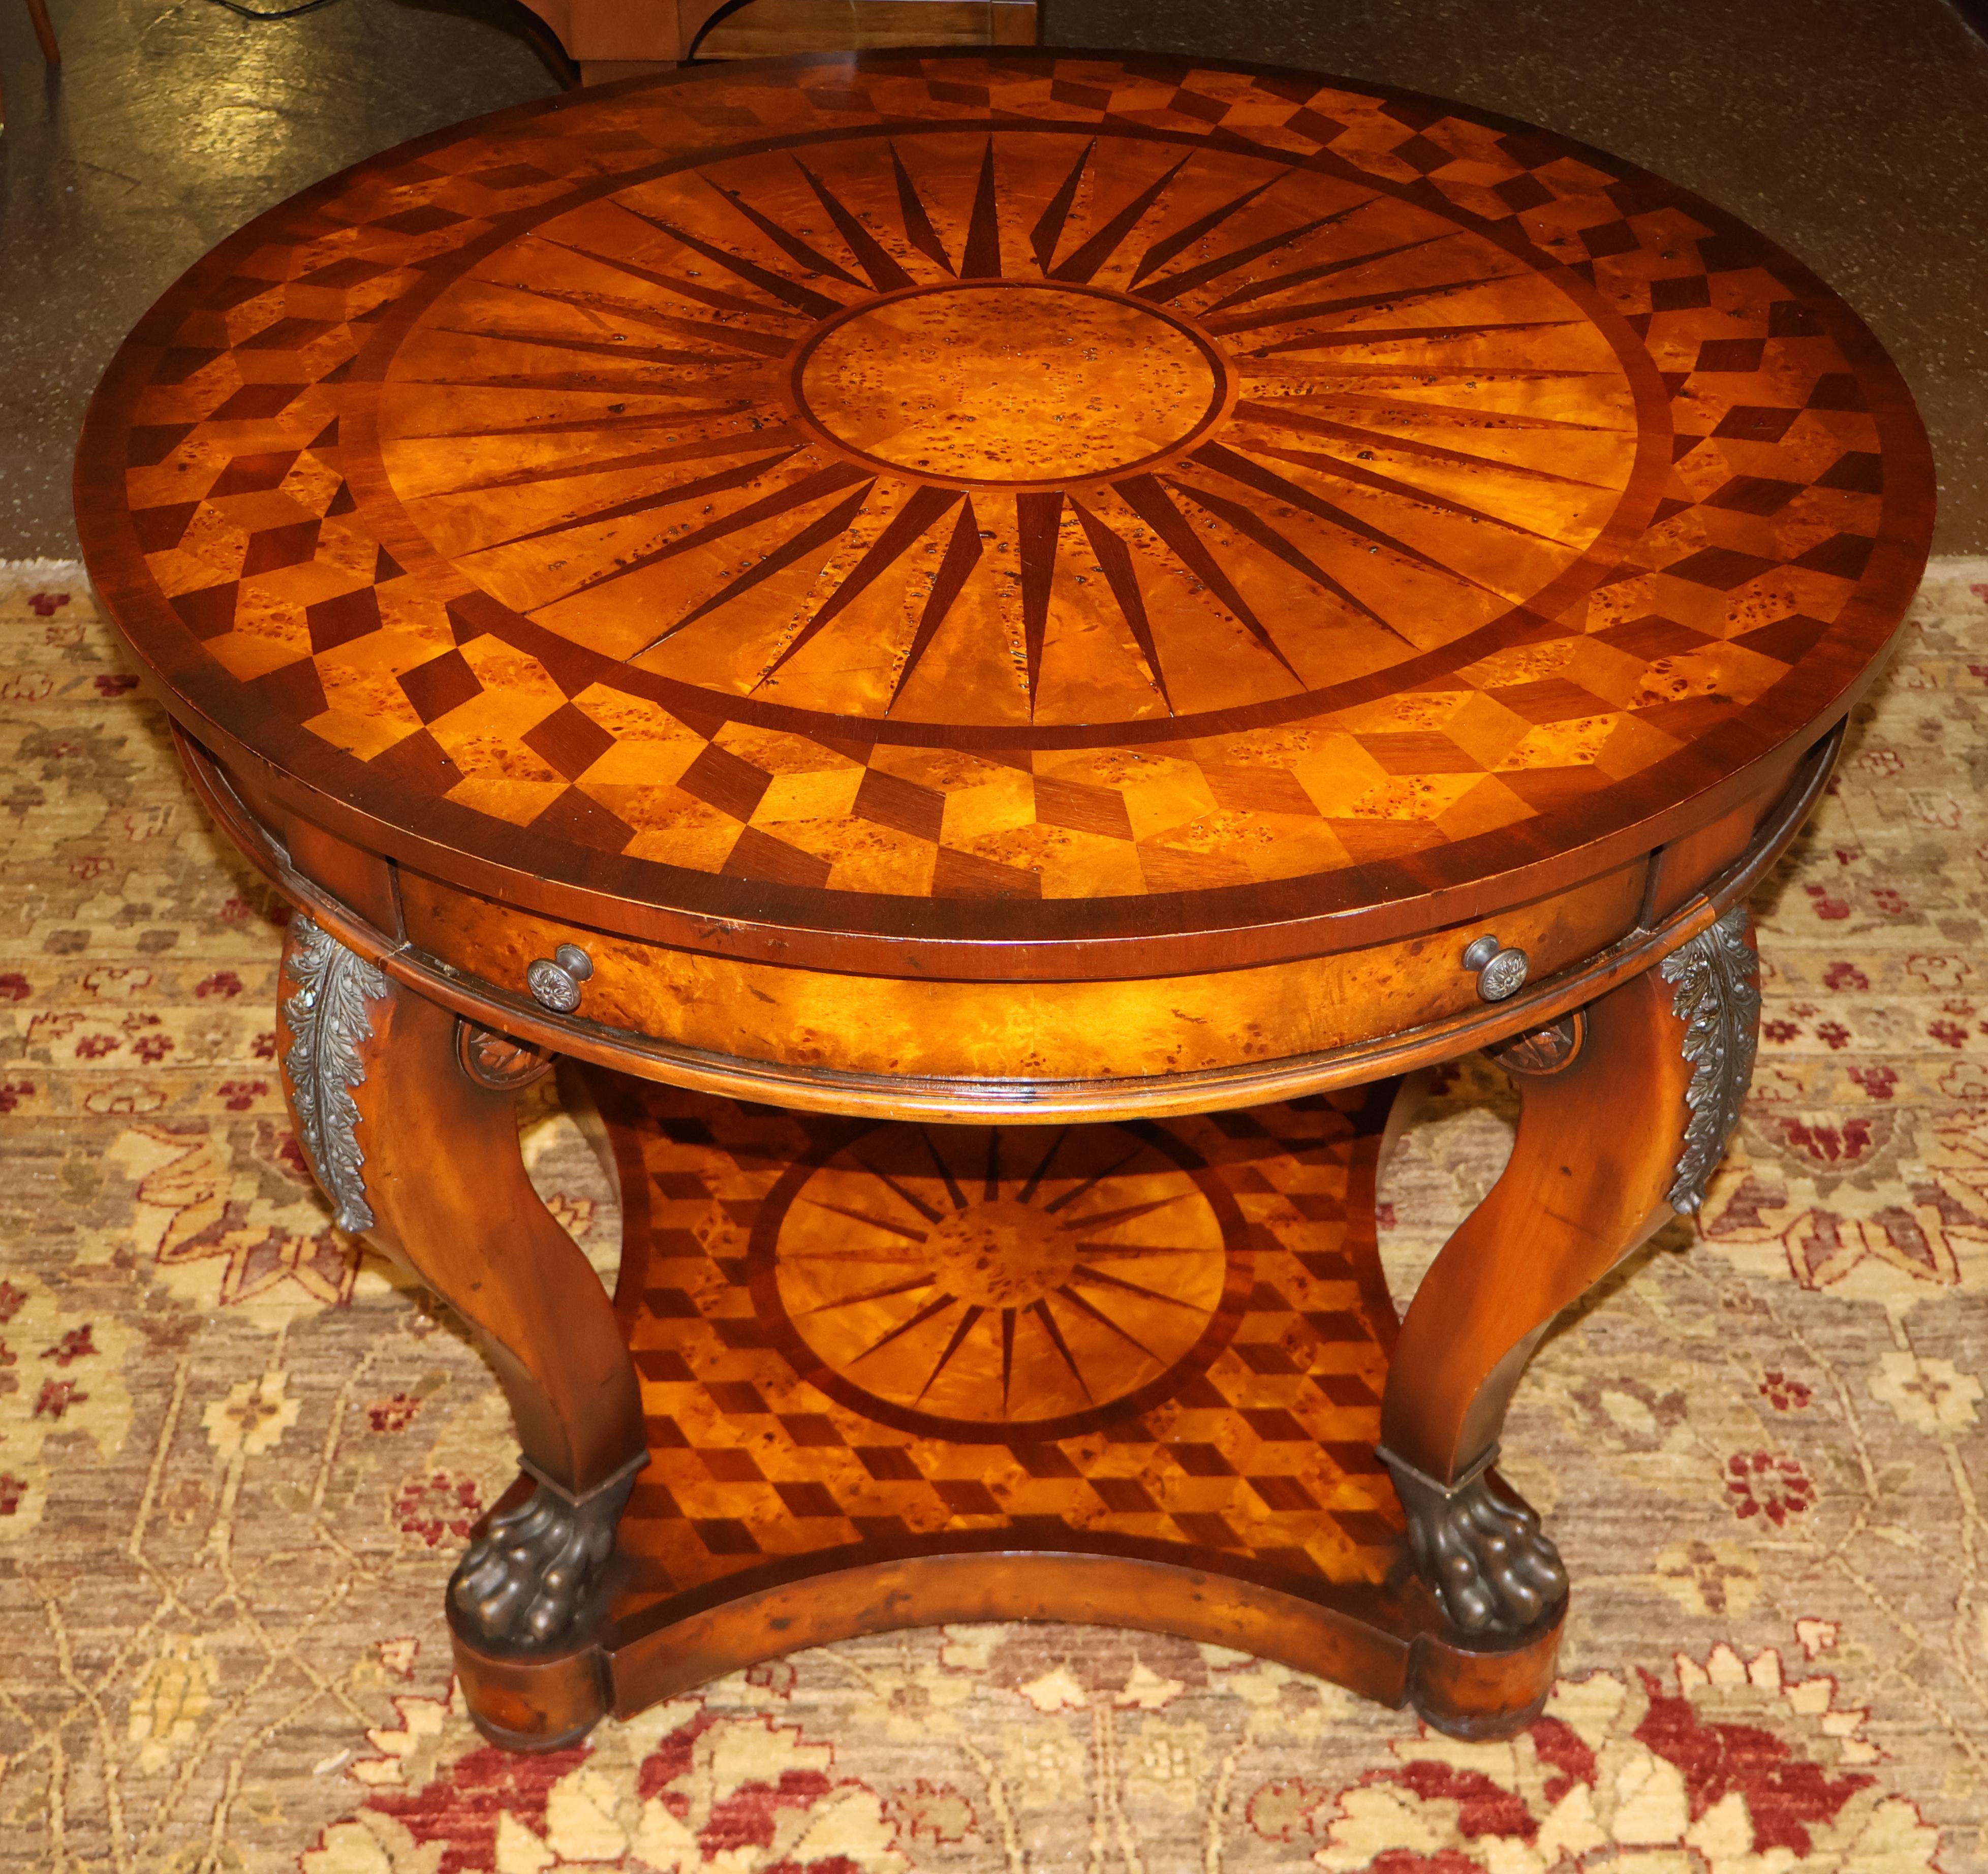 Vintage Theodore Alexander Bronze Mounted Burled Walnut Inlaid Center Table In Fair Condition For Sale In Long Branch, NJ